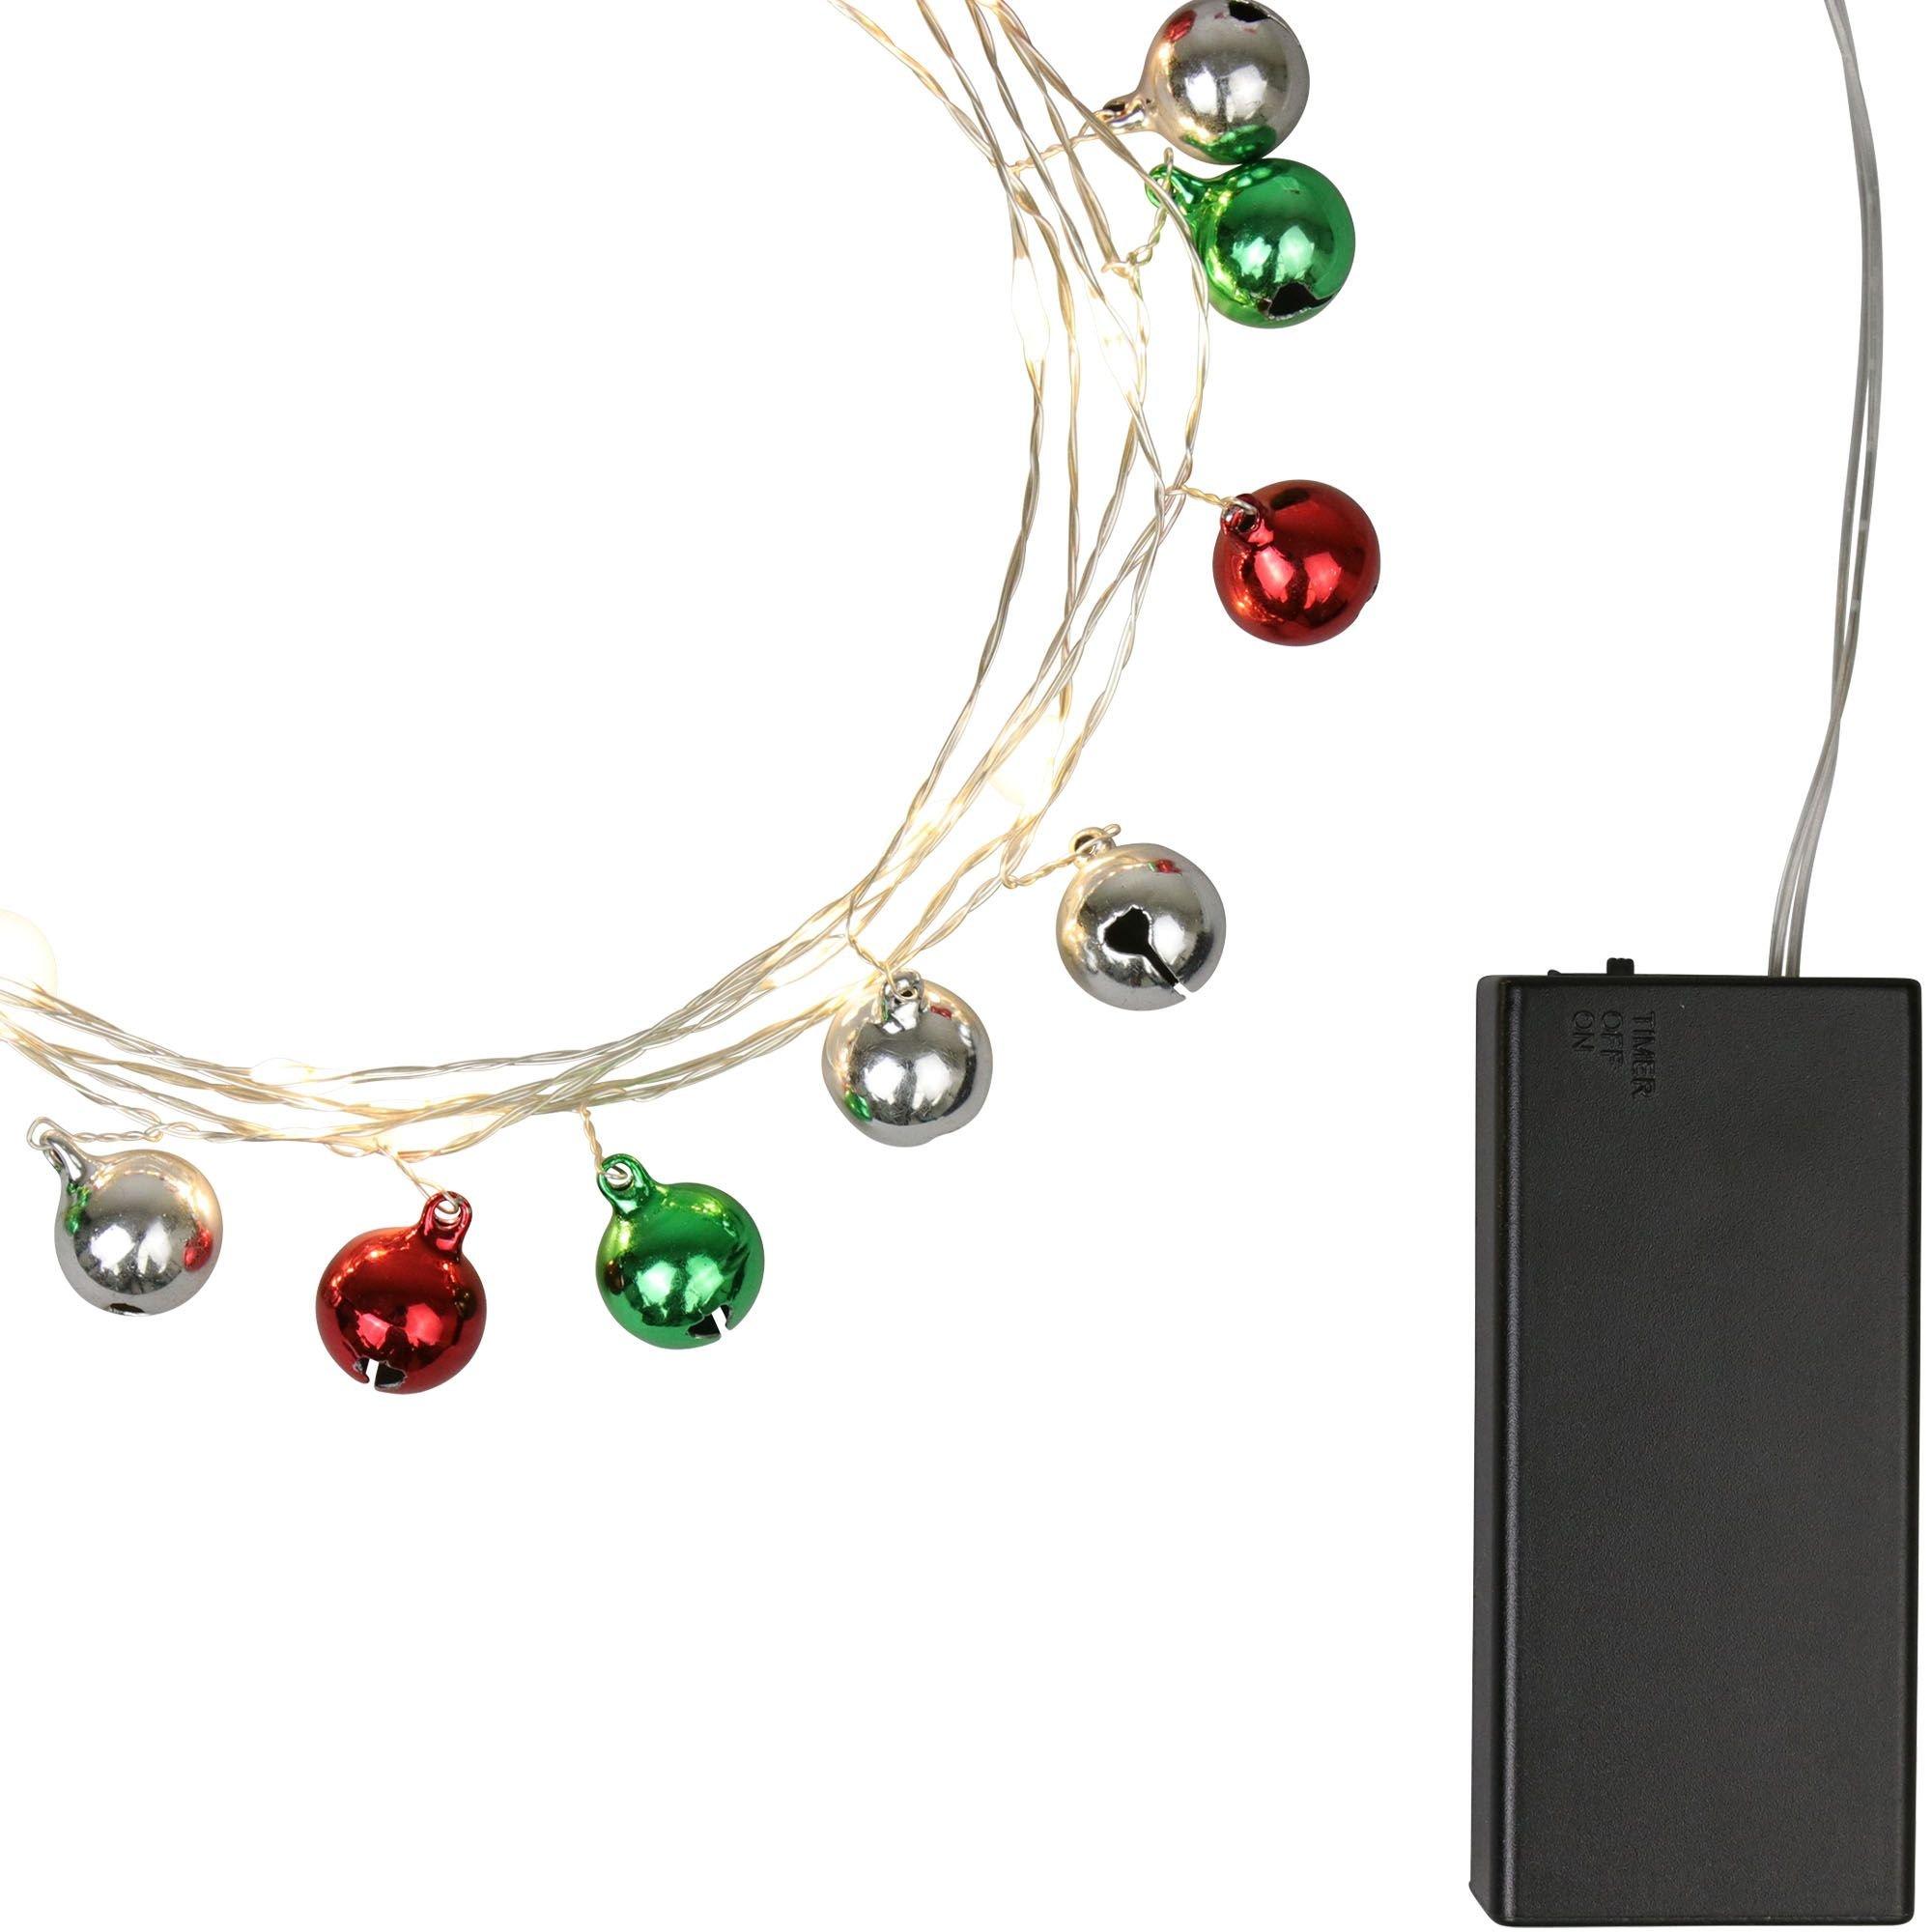 Green, Red & Silver Jingle Bell LED String Lights, 6.3ft